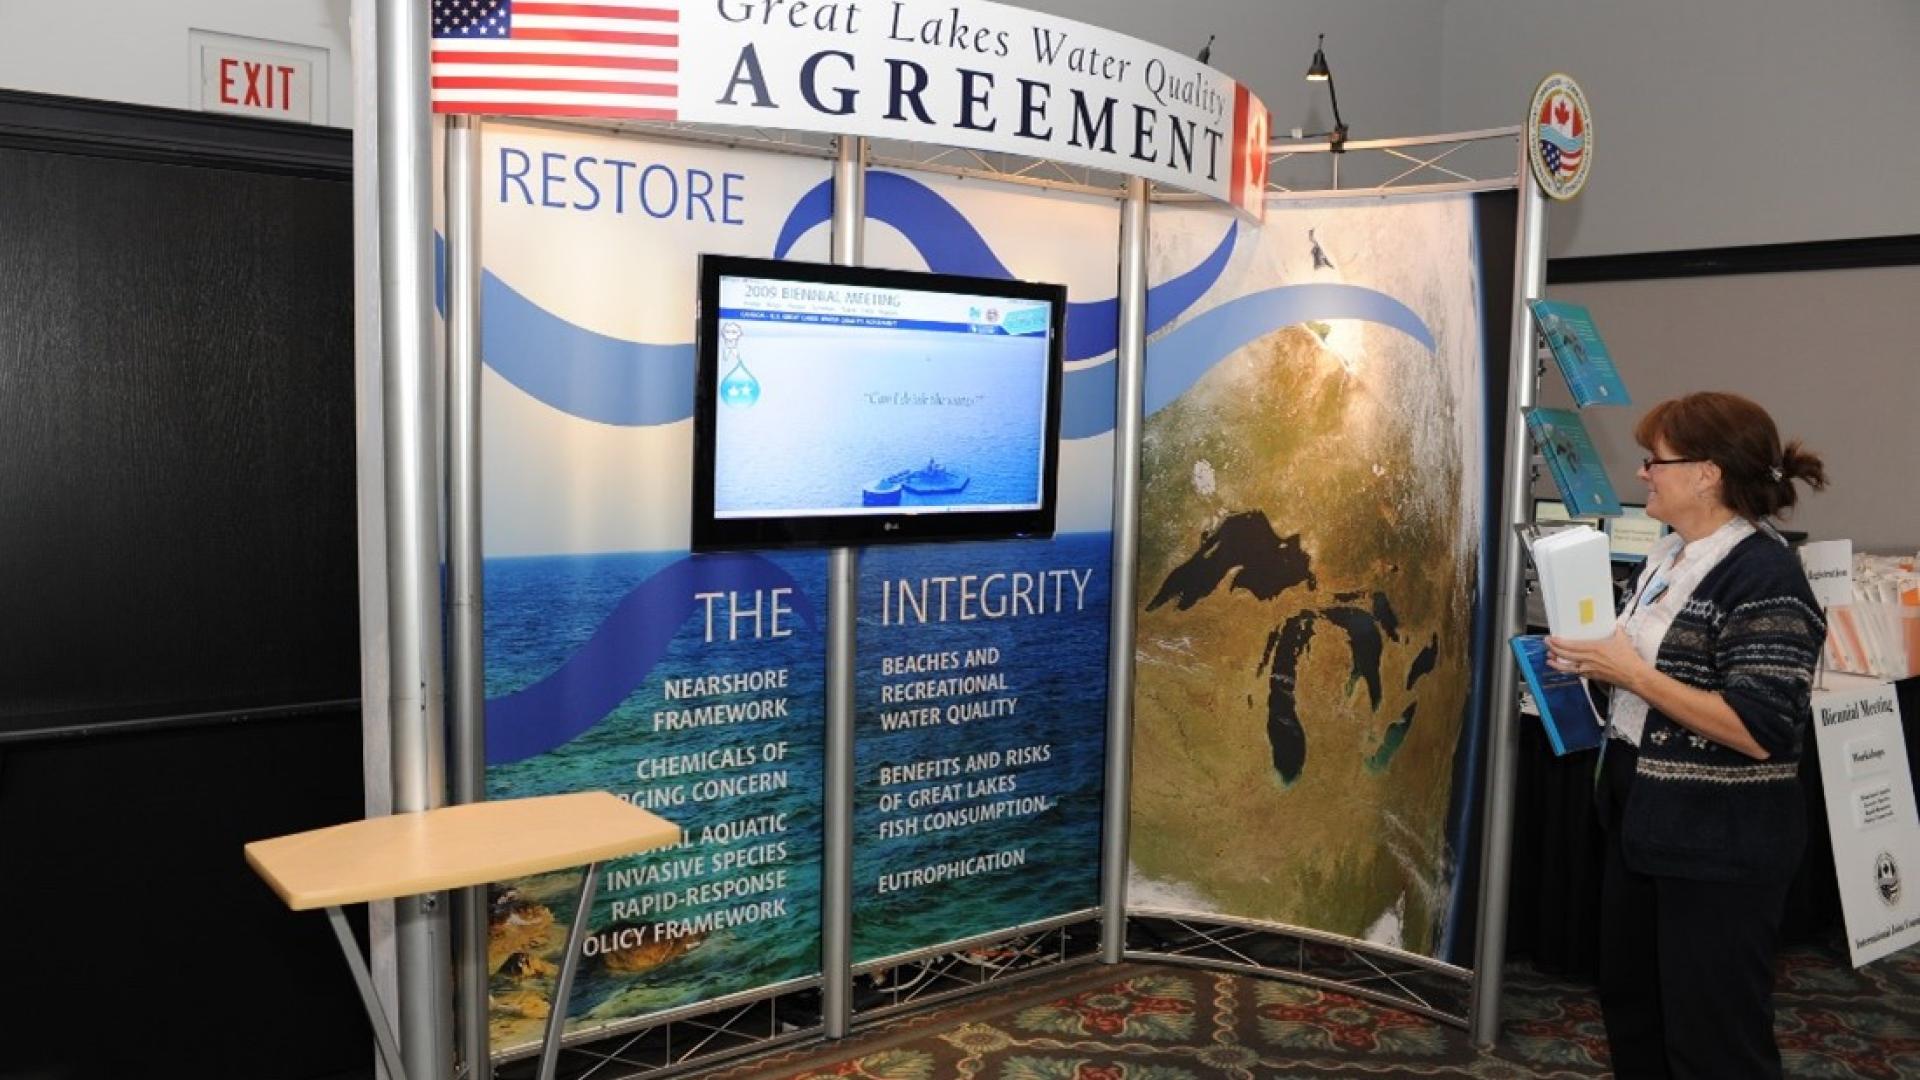 great lakes water quality agreement display biennial